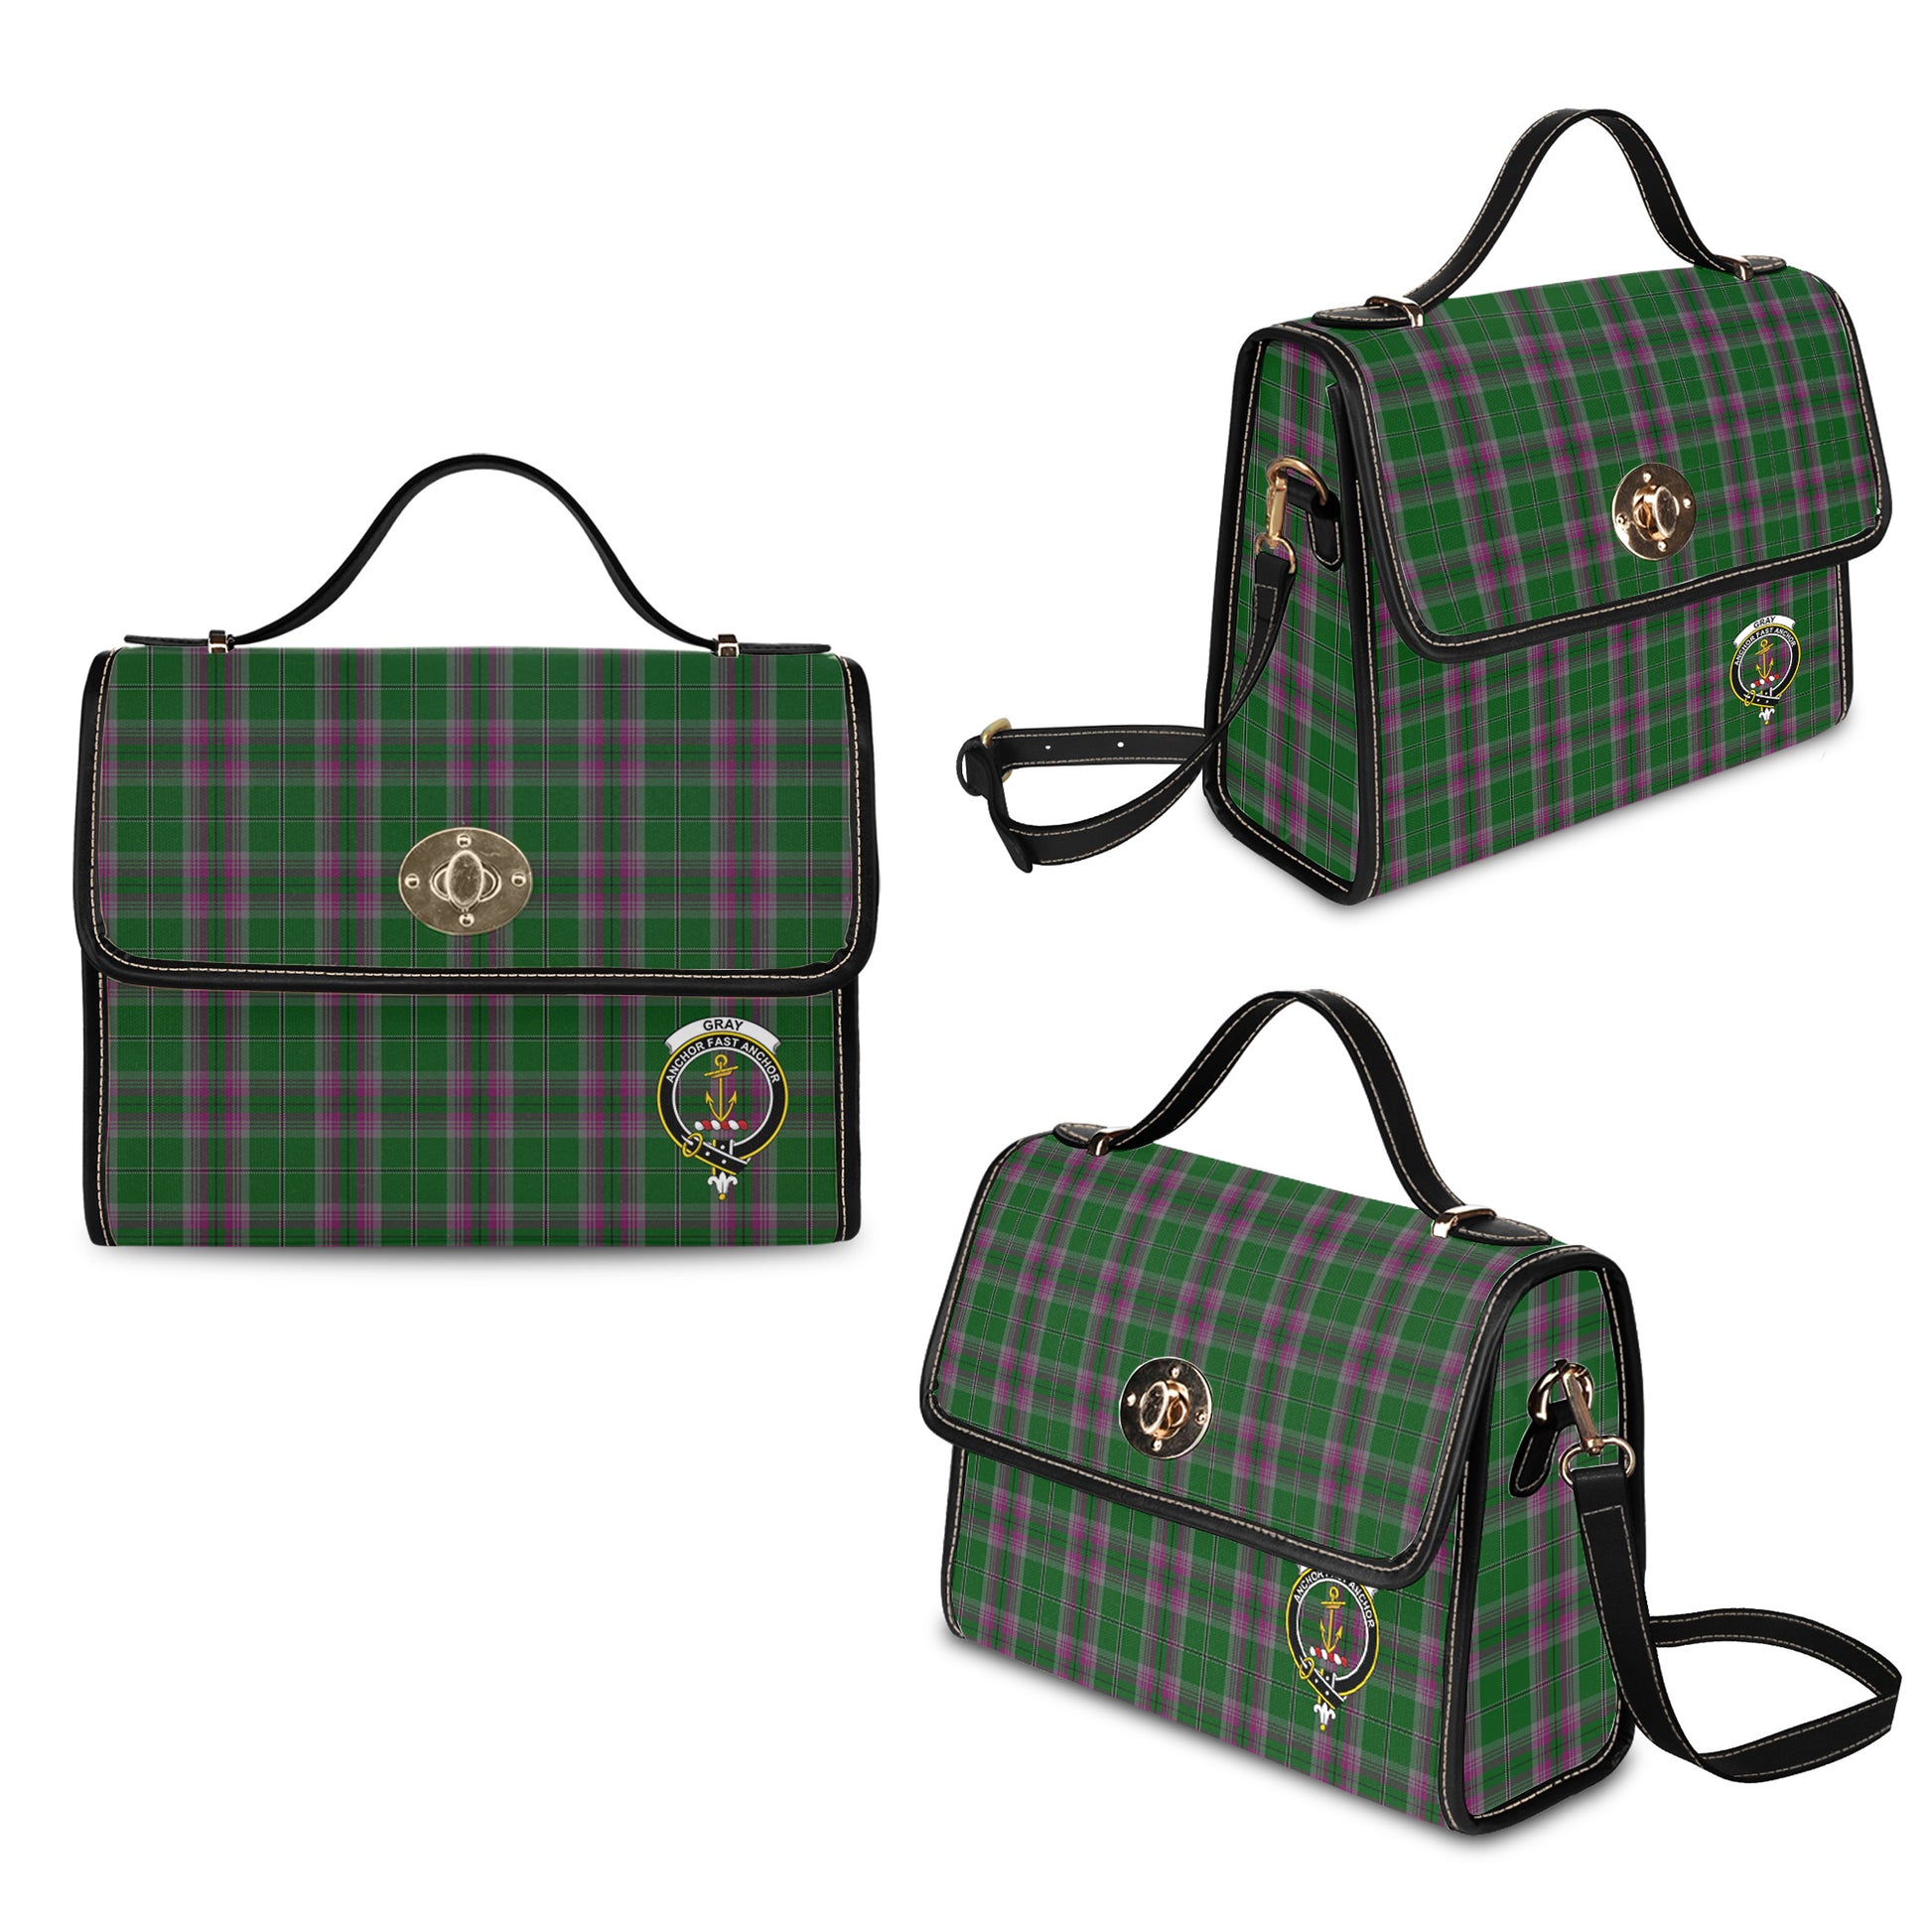 gray-hunting-tartan-leather-strap-waterproof-canvas-bag-with-family-crest